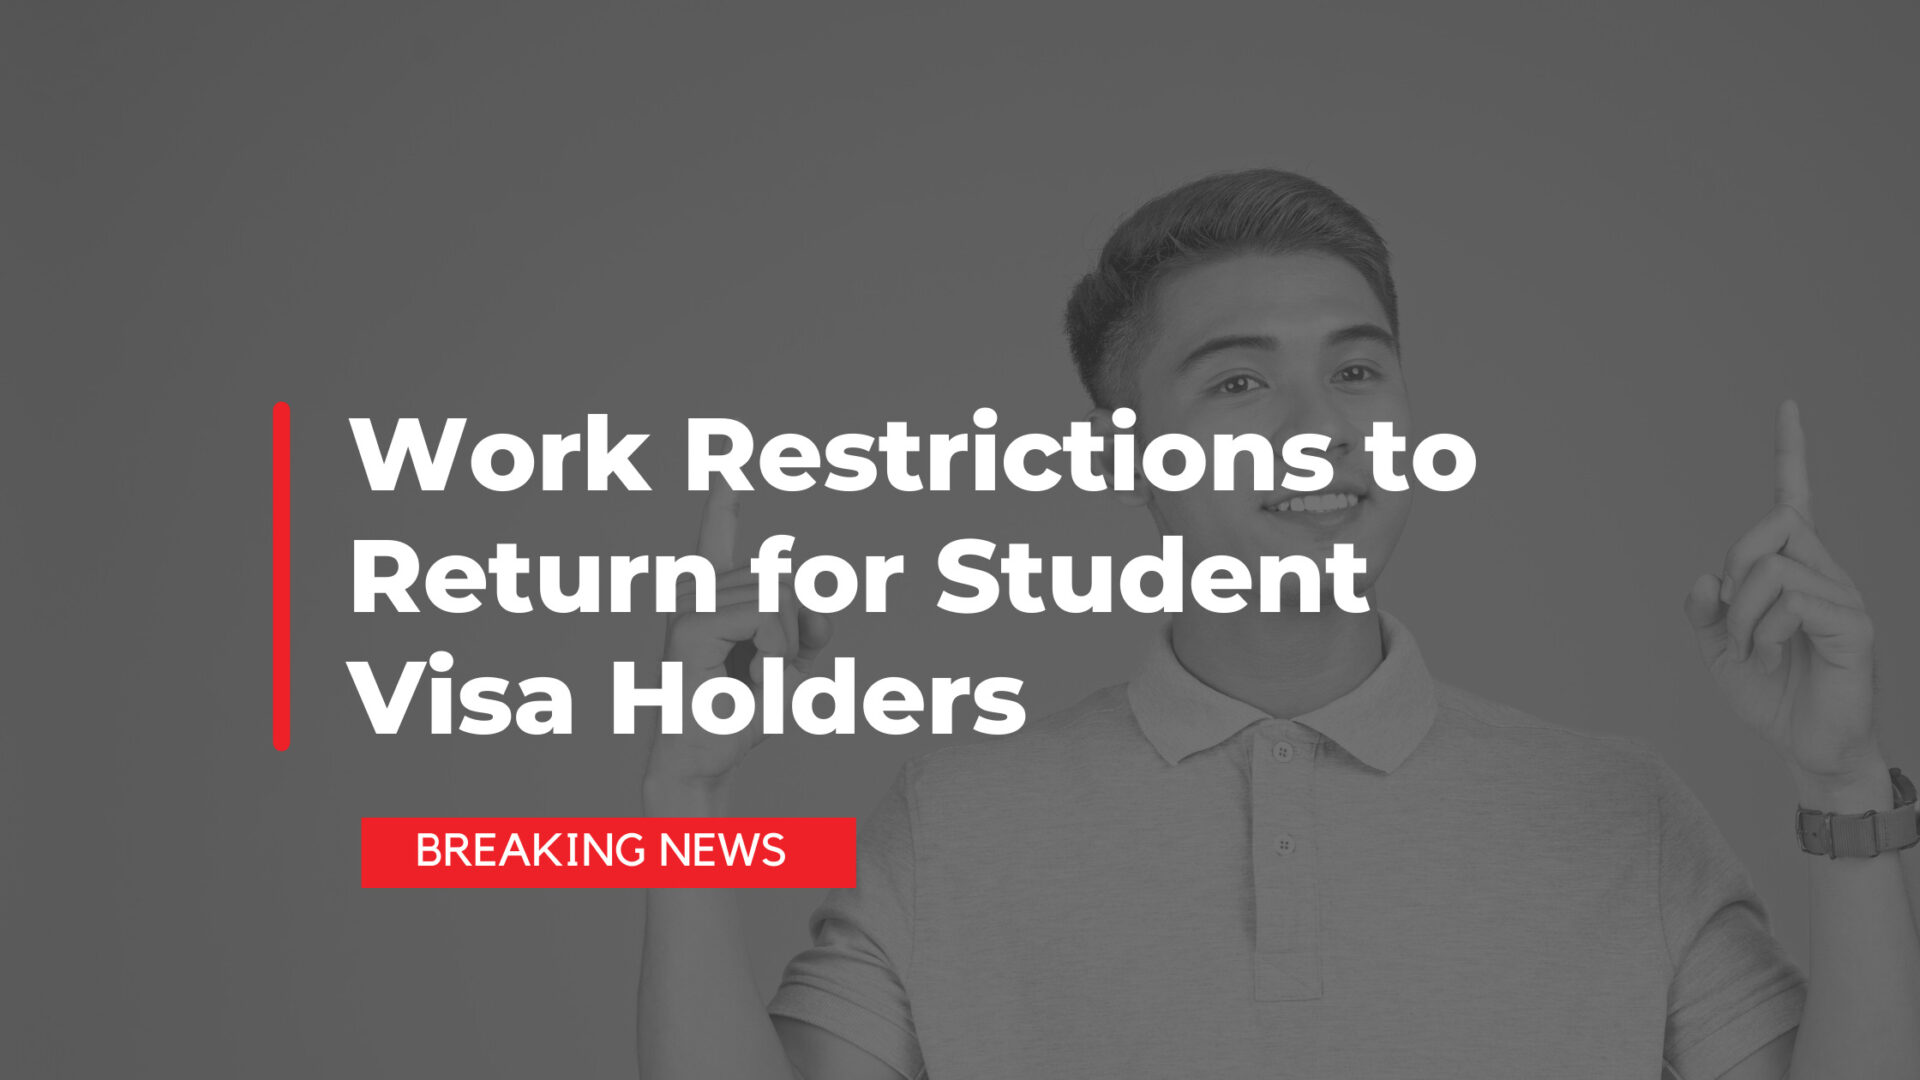 Important Update for International Students: Work Restrictions to Return for Student Visa Holders Starting 1st July